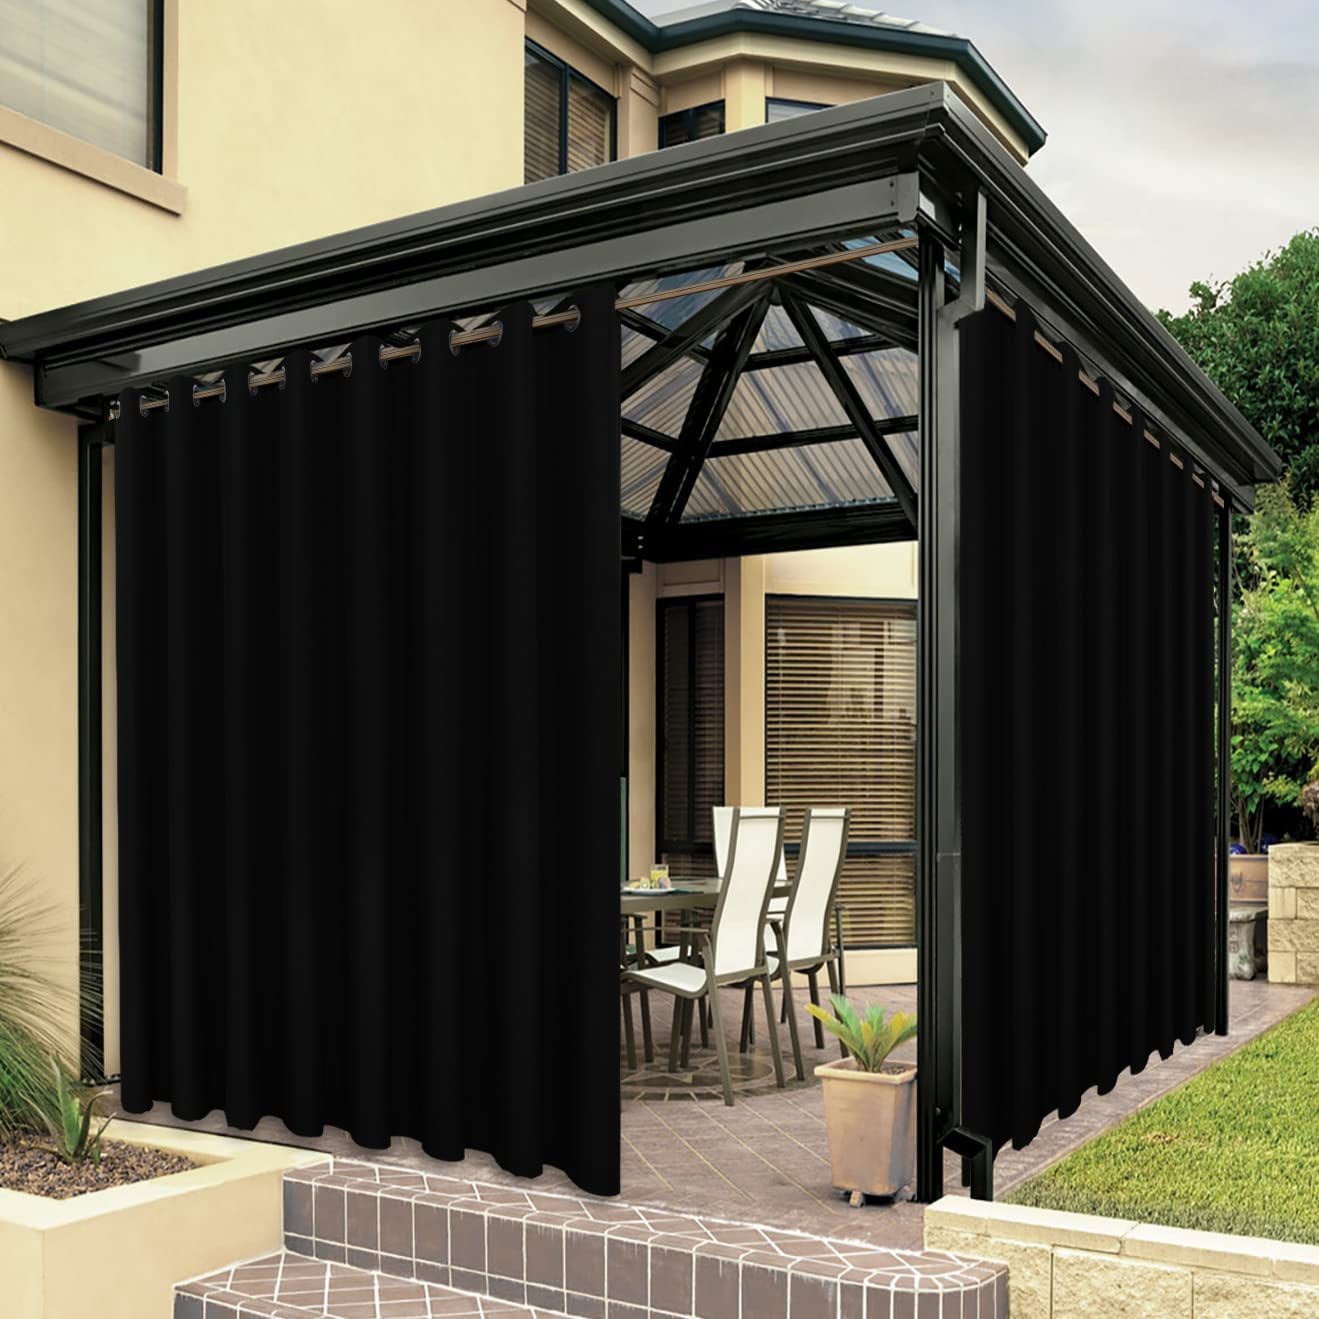 BONZER Outdoor Curtains for Patio Waterproof, Premium Thick Privacy Weatherproof Grommet outside Curtains for Porch, Gazebo, Deck, 1 Panel, 54W X 84L Inch, White  BONZER Black 150W X 95L Inch 